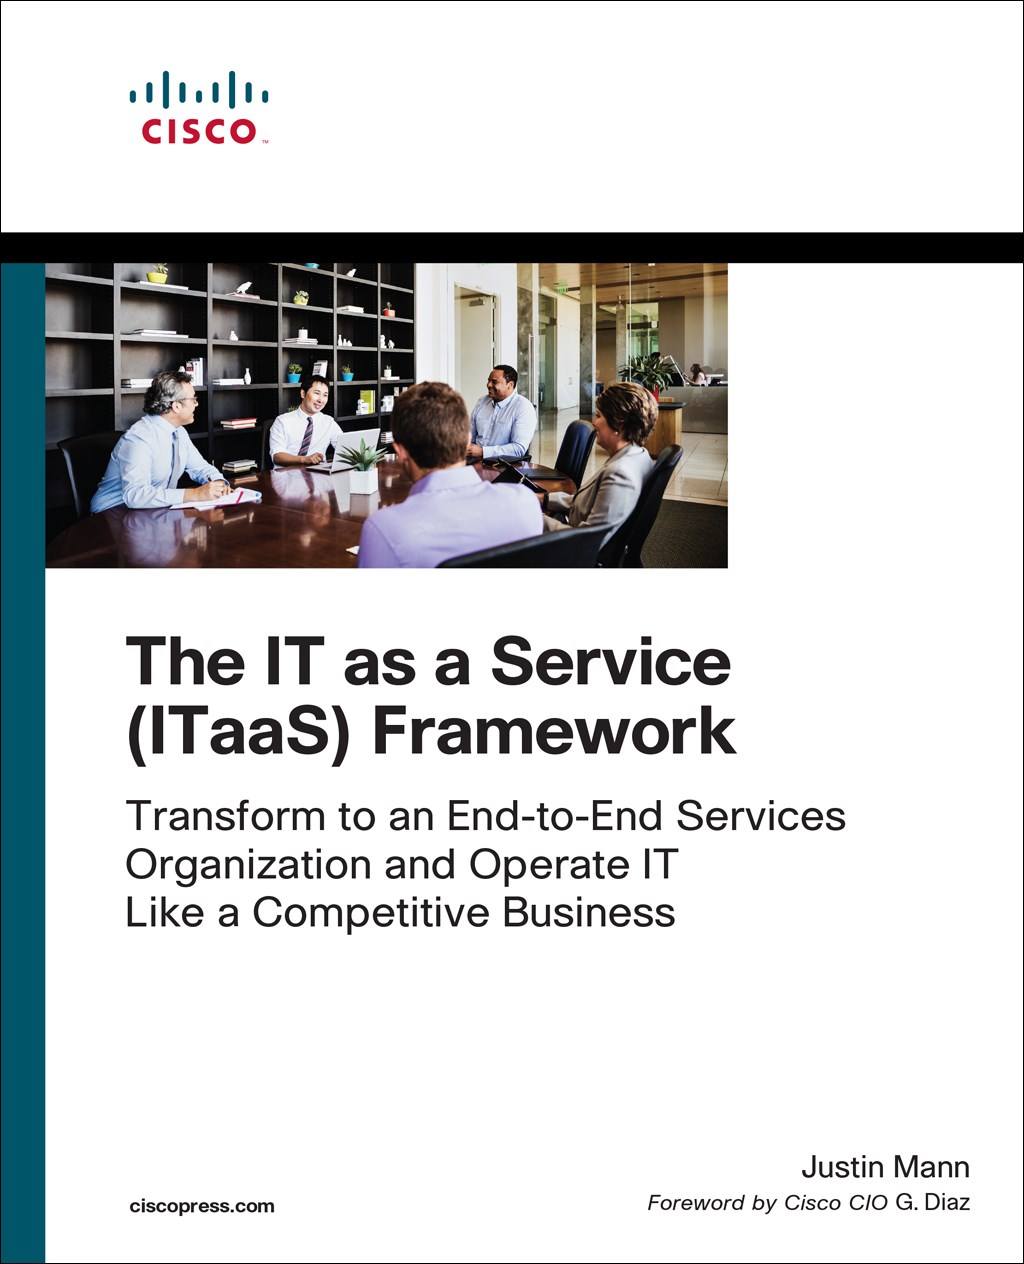 IT as a Service (ITaaS) Framework, The: Transform to an End-to-End Services Organization and Operate IT like a Competitive Business